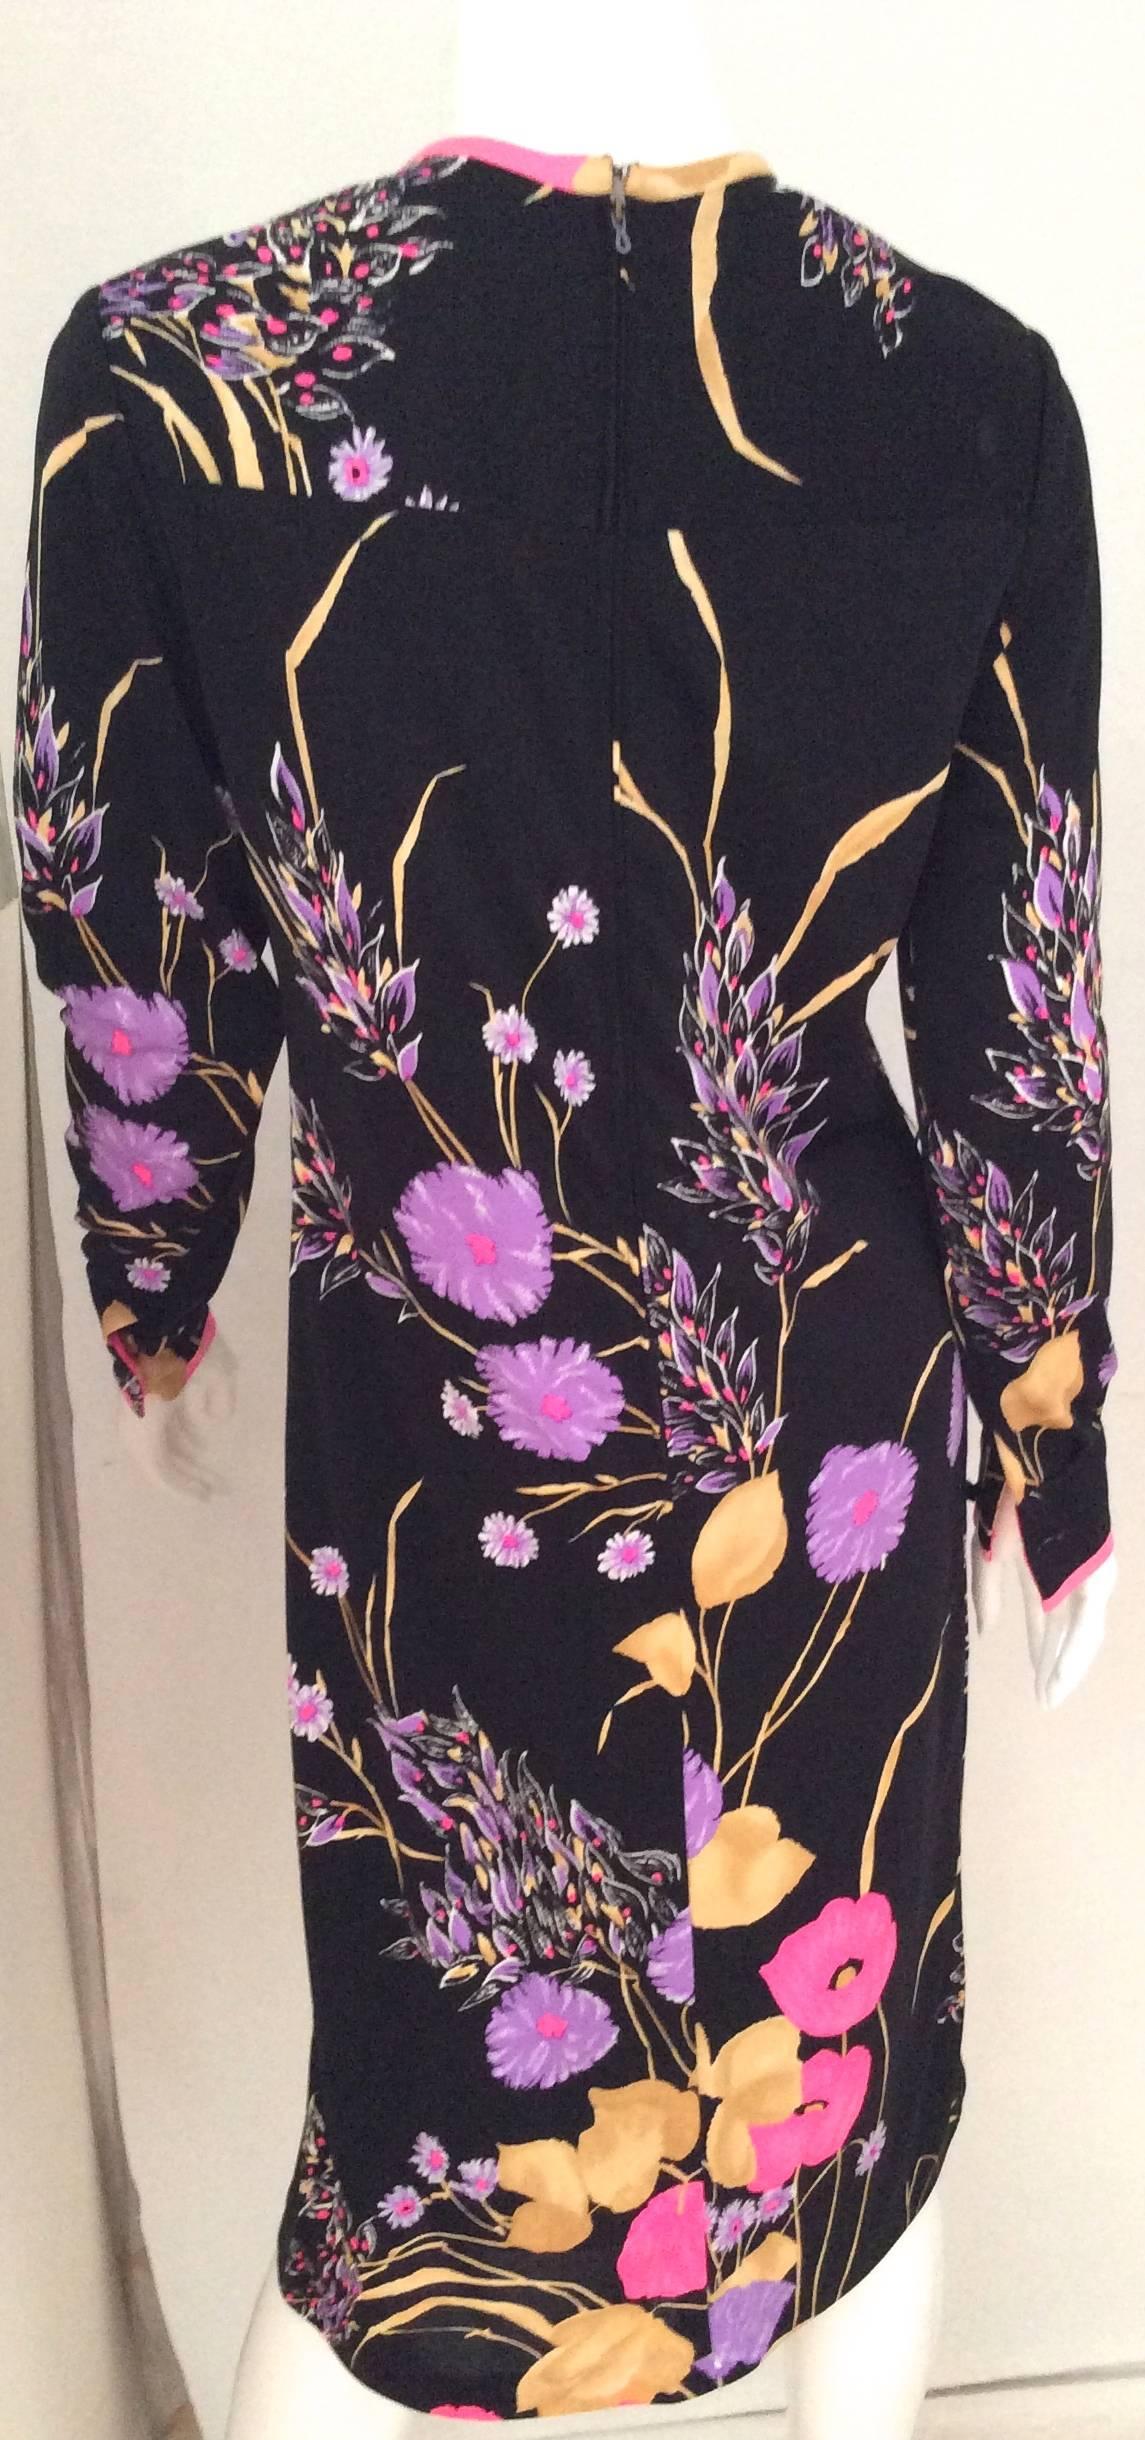 Beautiful black dress with electric color of floral designs consisting of hot pink, purple, gold, white, and lavender. Mint Condition. This beautiful Leonard dress fits approximately a size US 6. It is from the late 1960's. The shoulder measurement